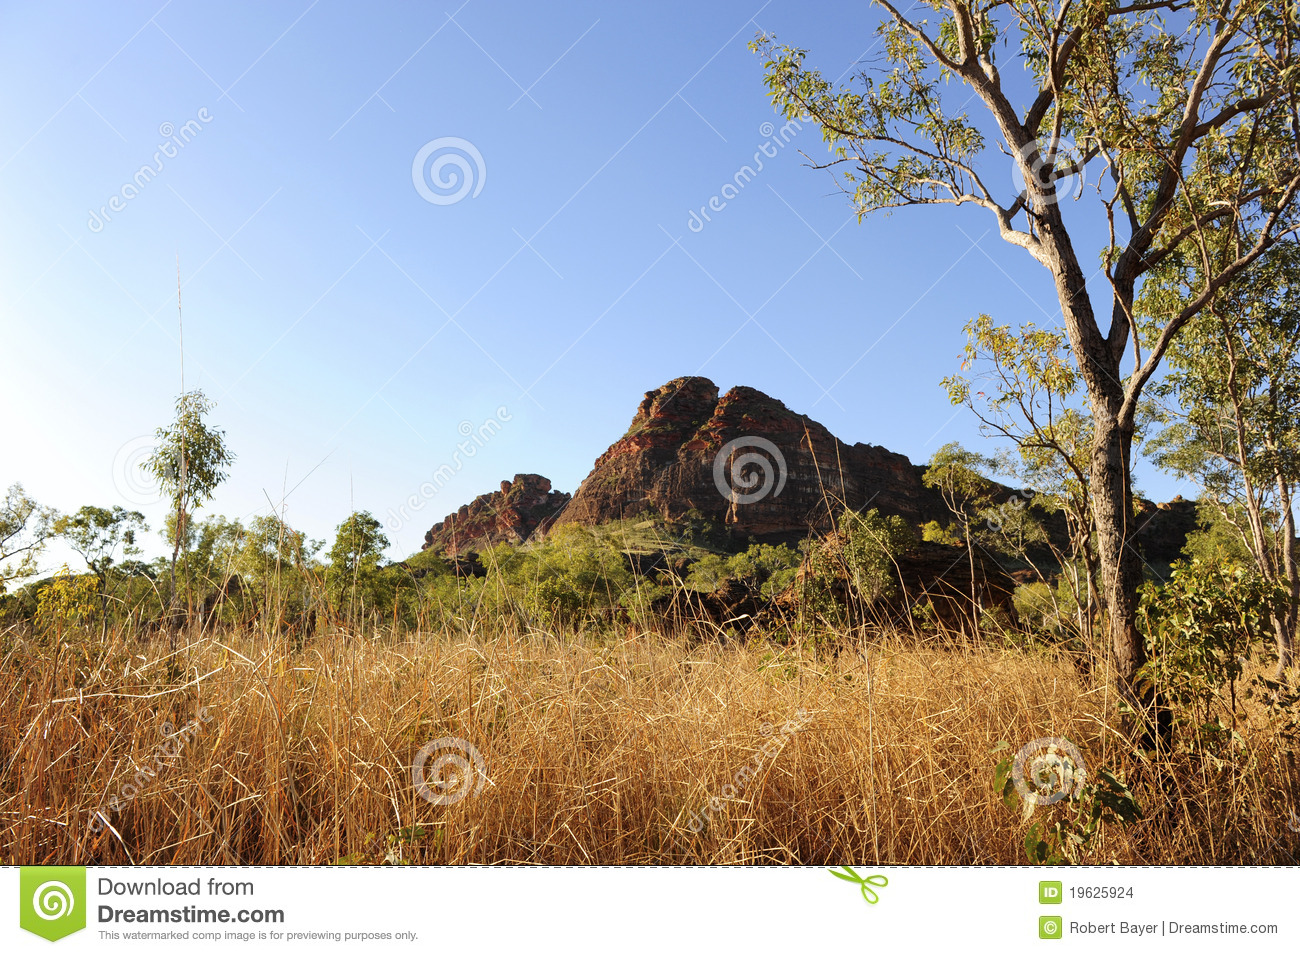 High Grass And Mountain Range In Outback Australia